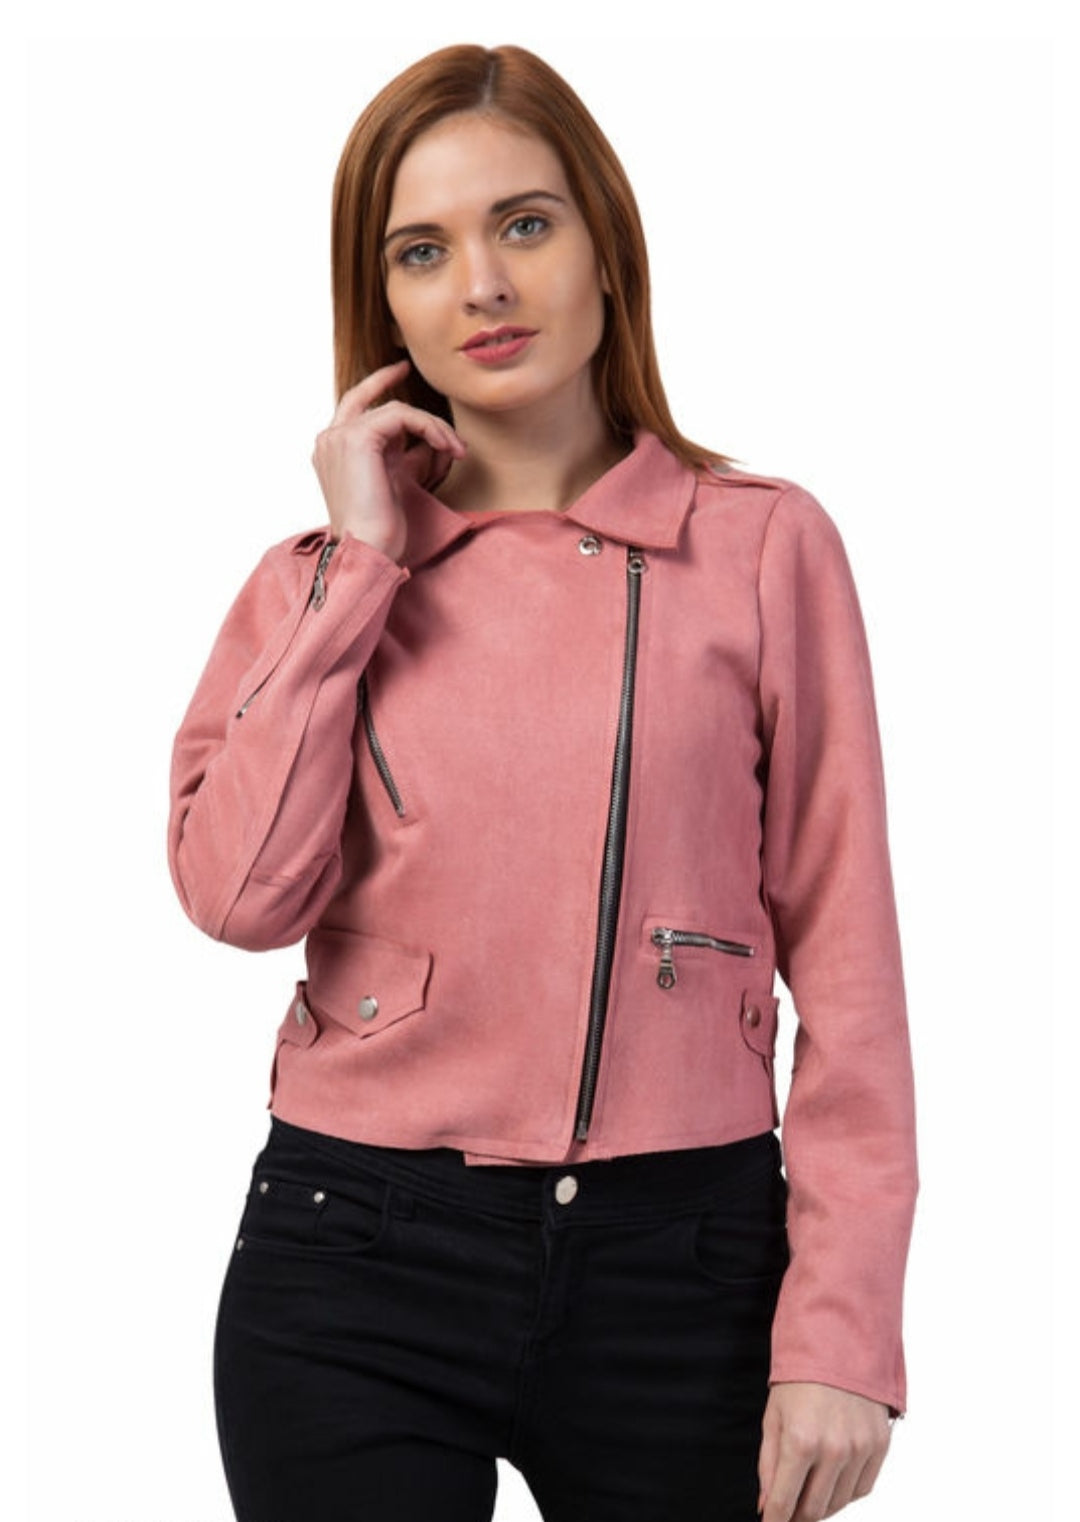 Trendy Stylish Solid Suede Full Sleeves Jacket.